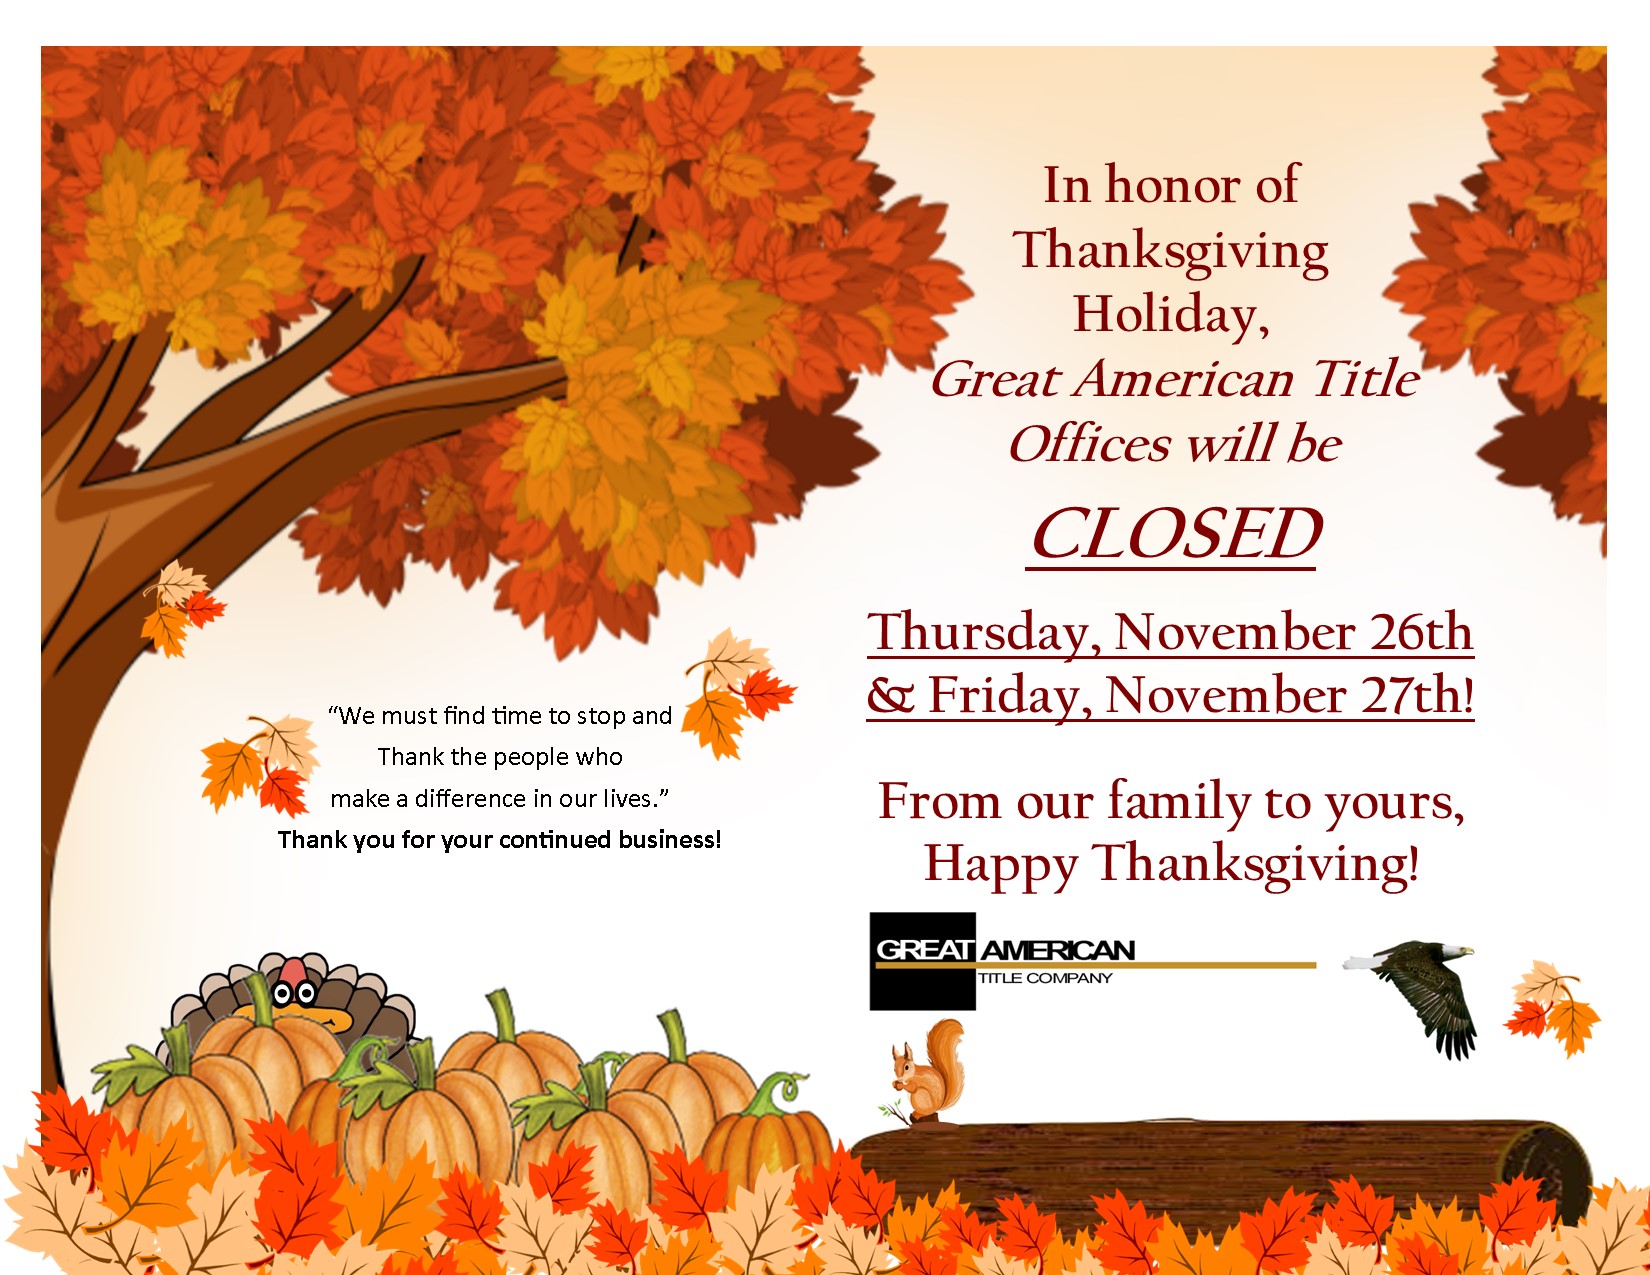 We will be CLOSED for Thanksgiving Holiday on November 26th and 27th